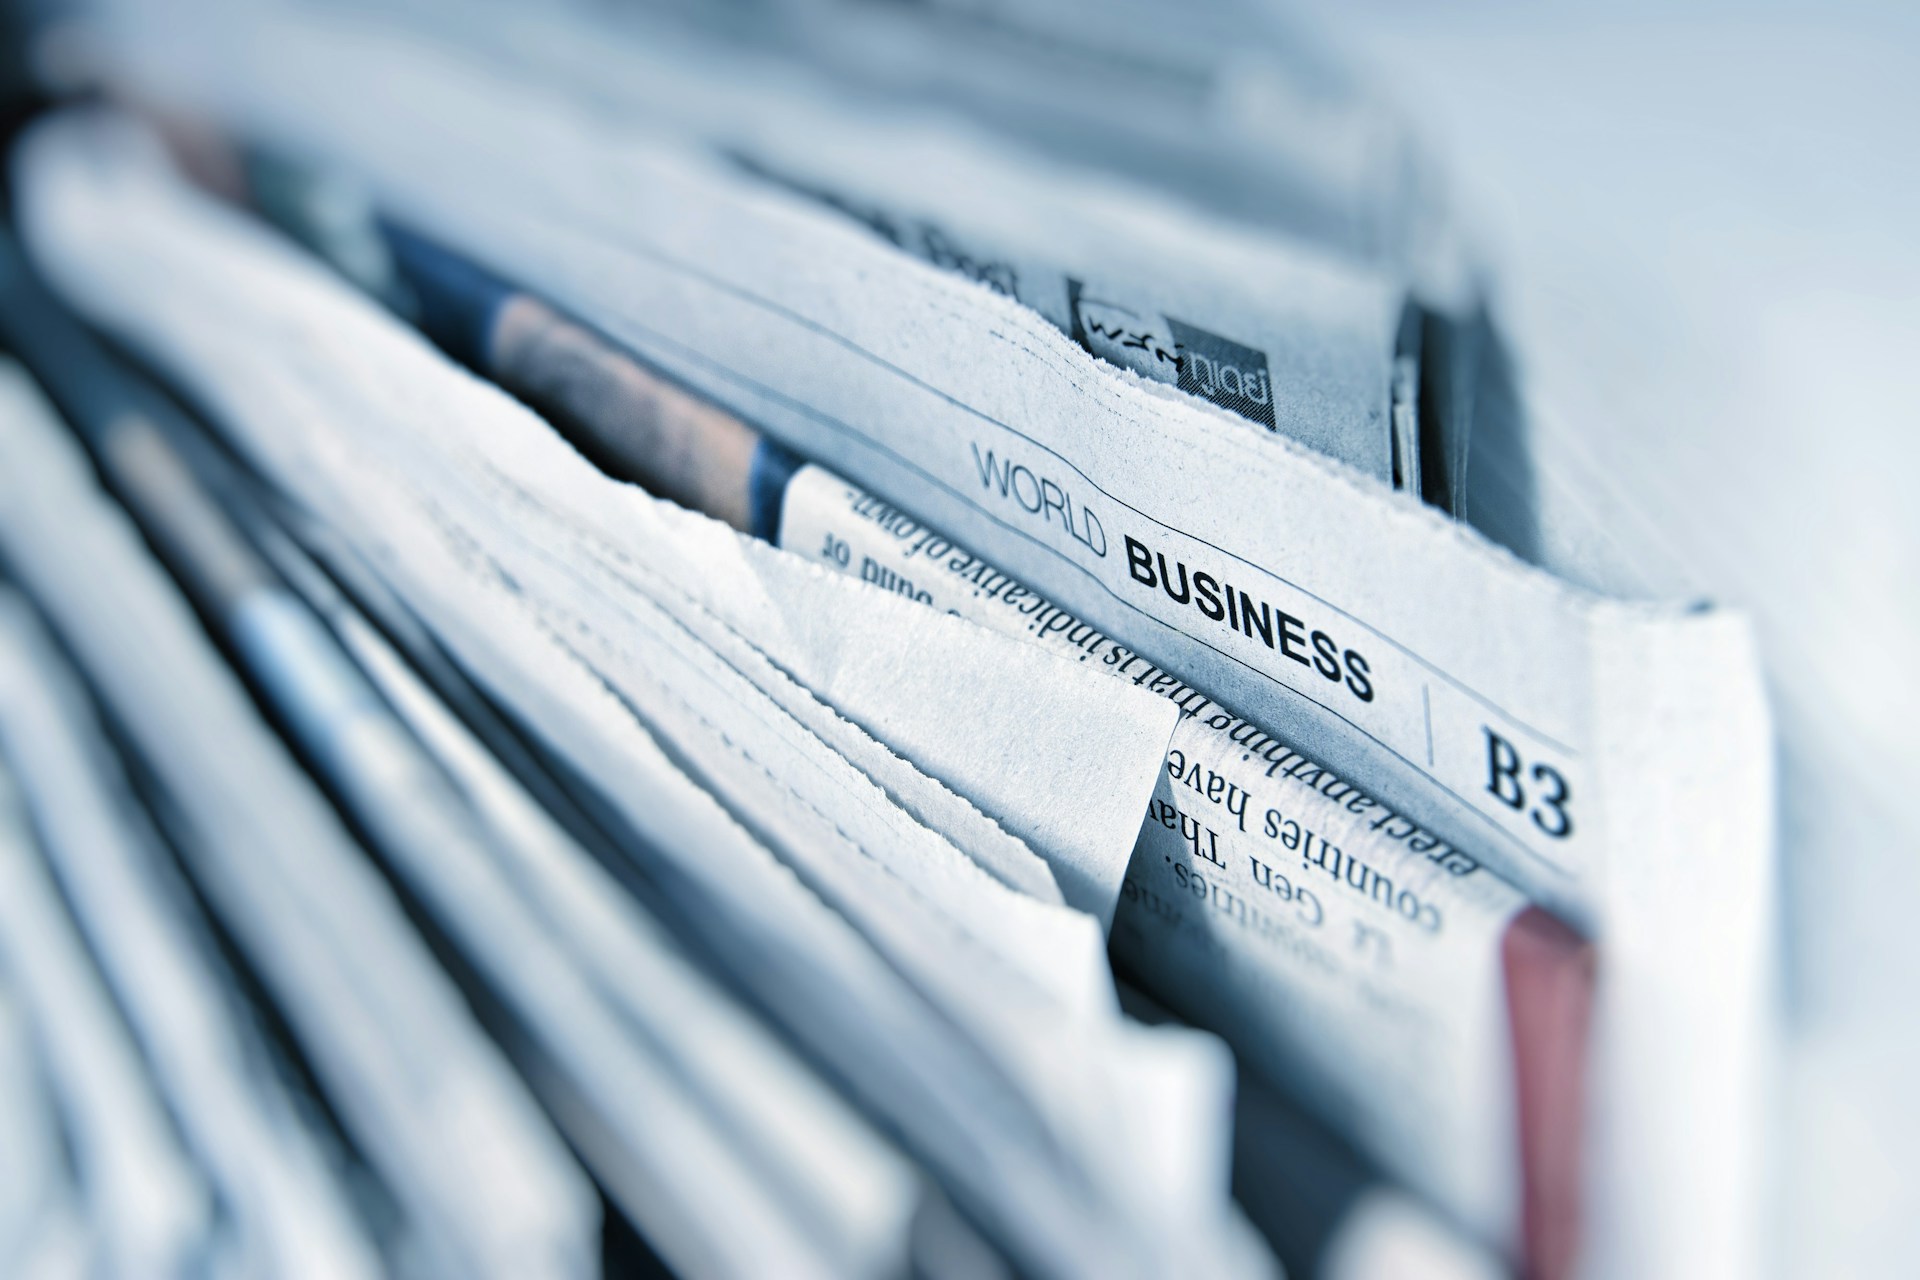  newspapers with business section pulled out.  reports, business, stats, publications